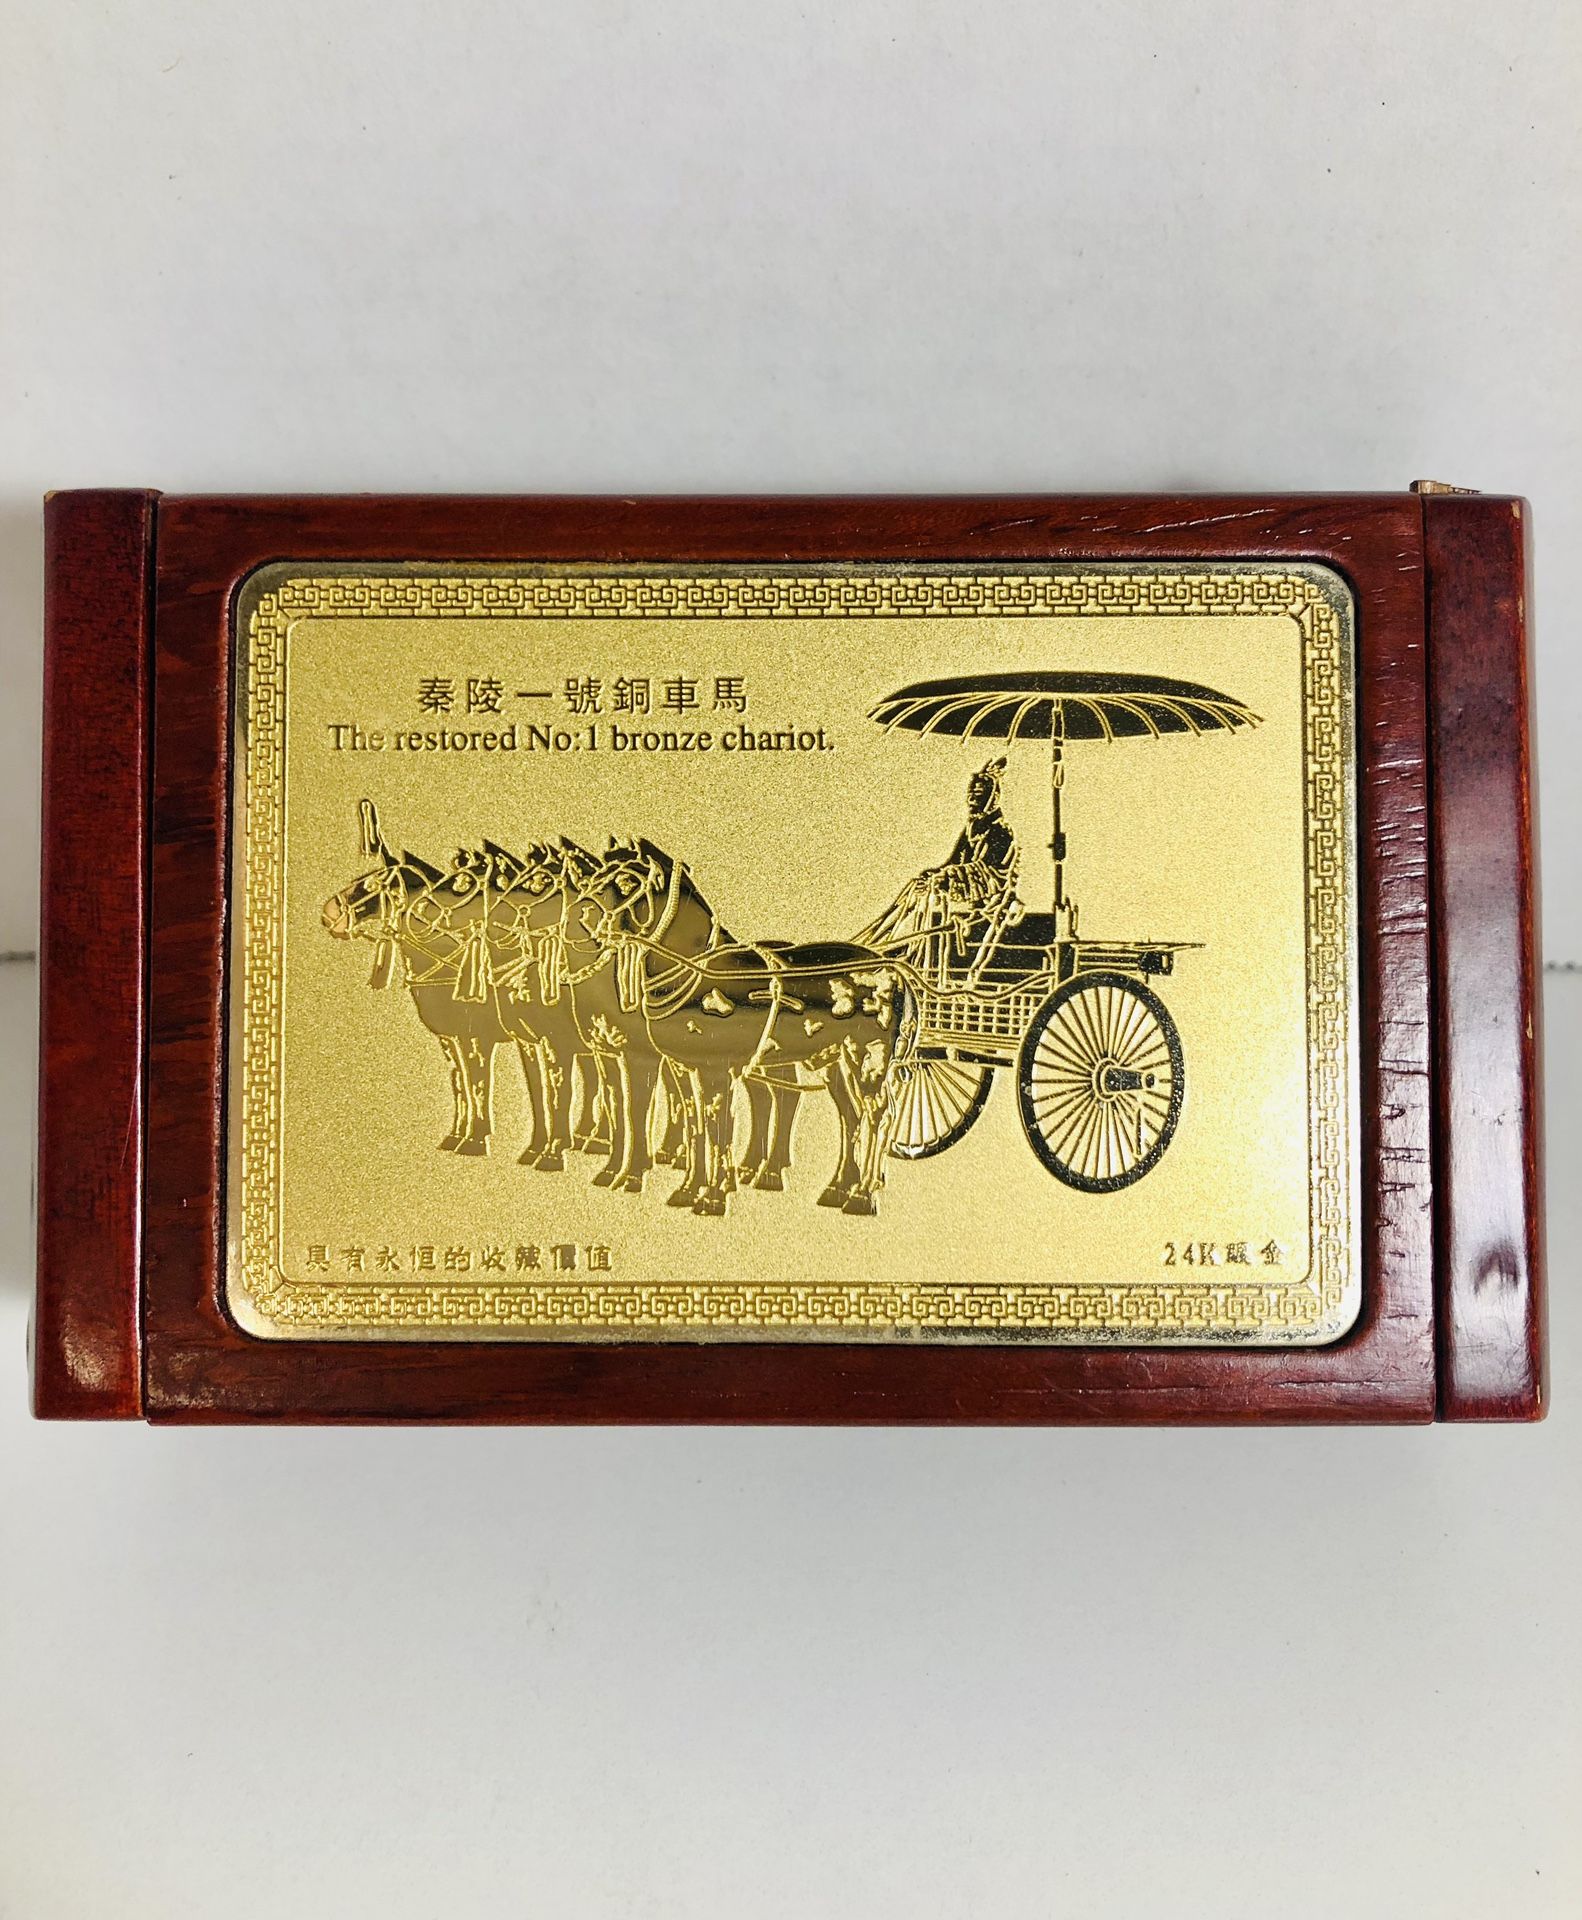 Chinese Souvenir The Terra Cotta Army of China 24 K Wooden Trinket Box.  